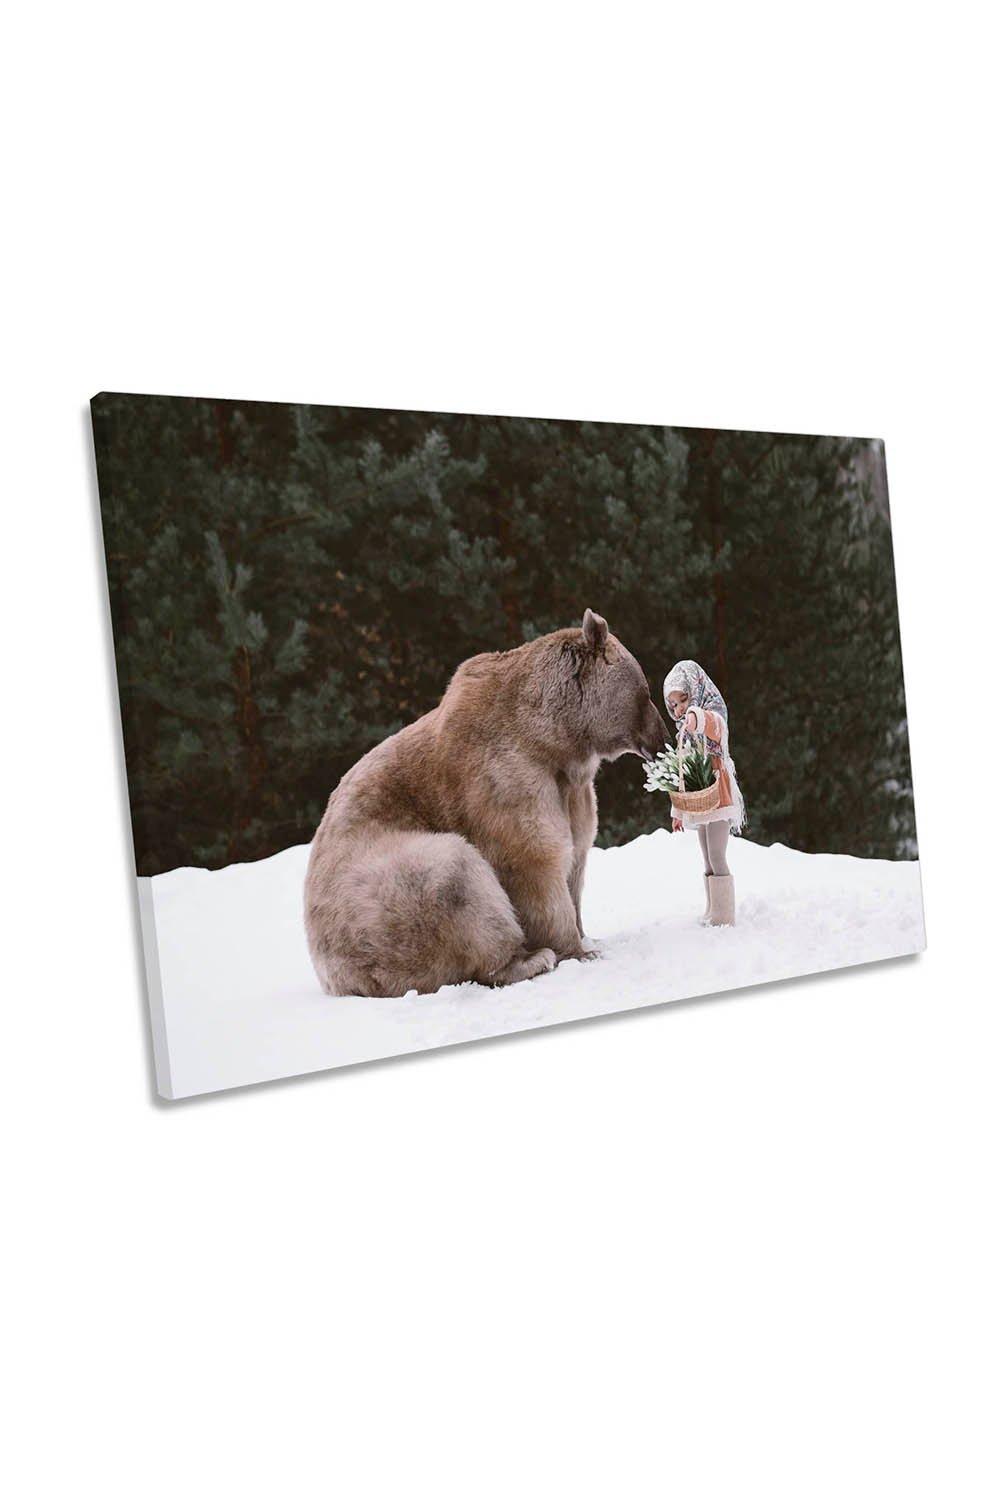 The Girl and the Bear Friends Canvas Wall Art Picture Print